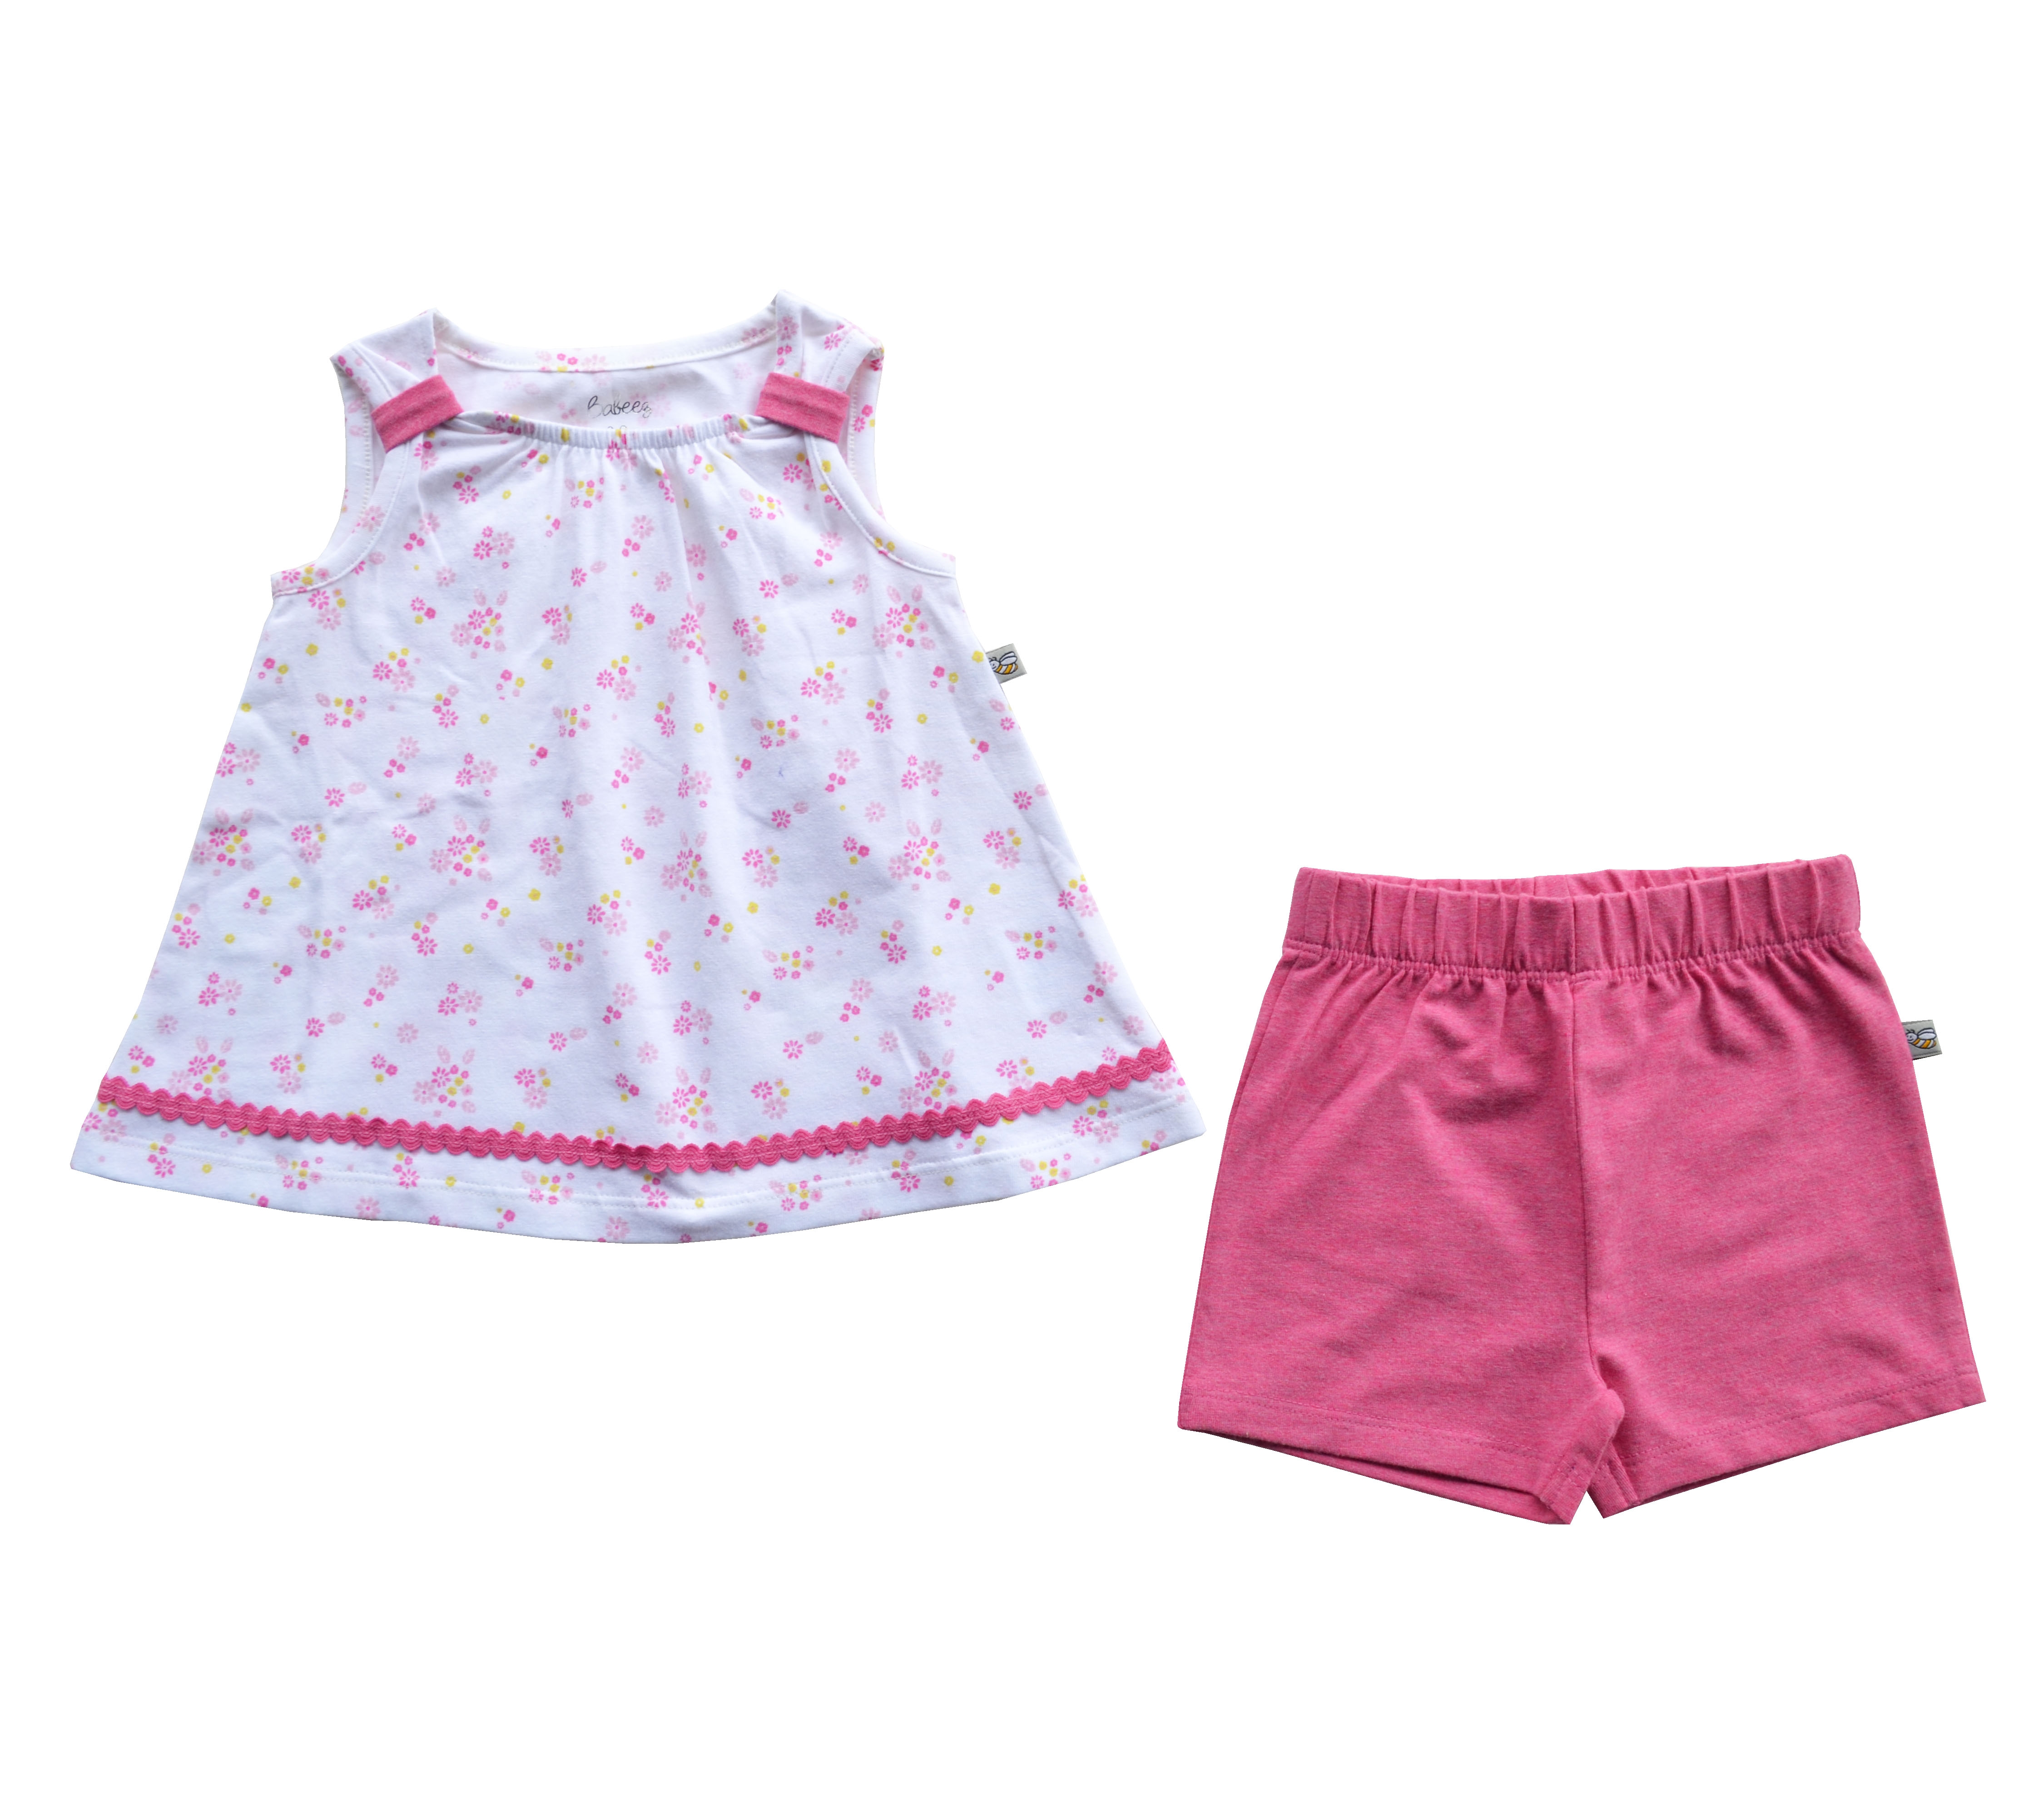 Babeez | Allover Flower Printed White Top + Pink Shorty Set (95% Cotton 5% Elasthan Jersey) undefined